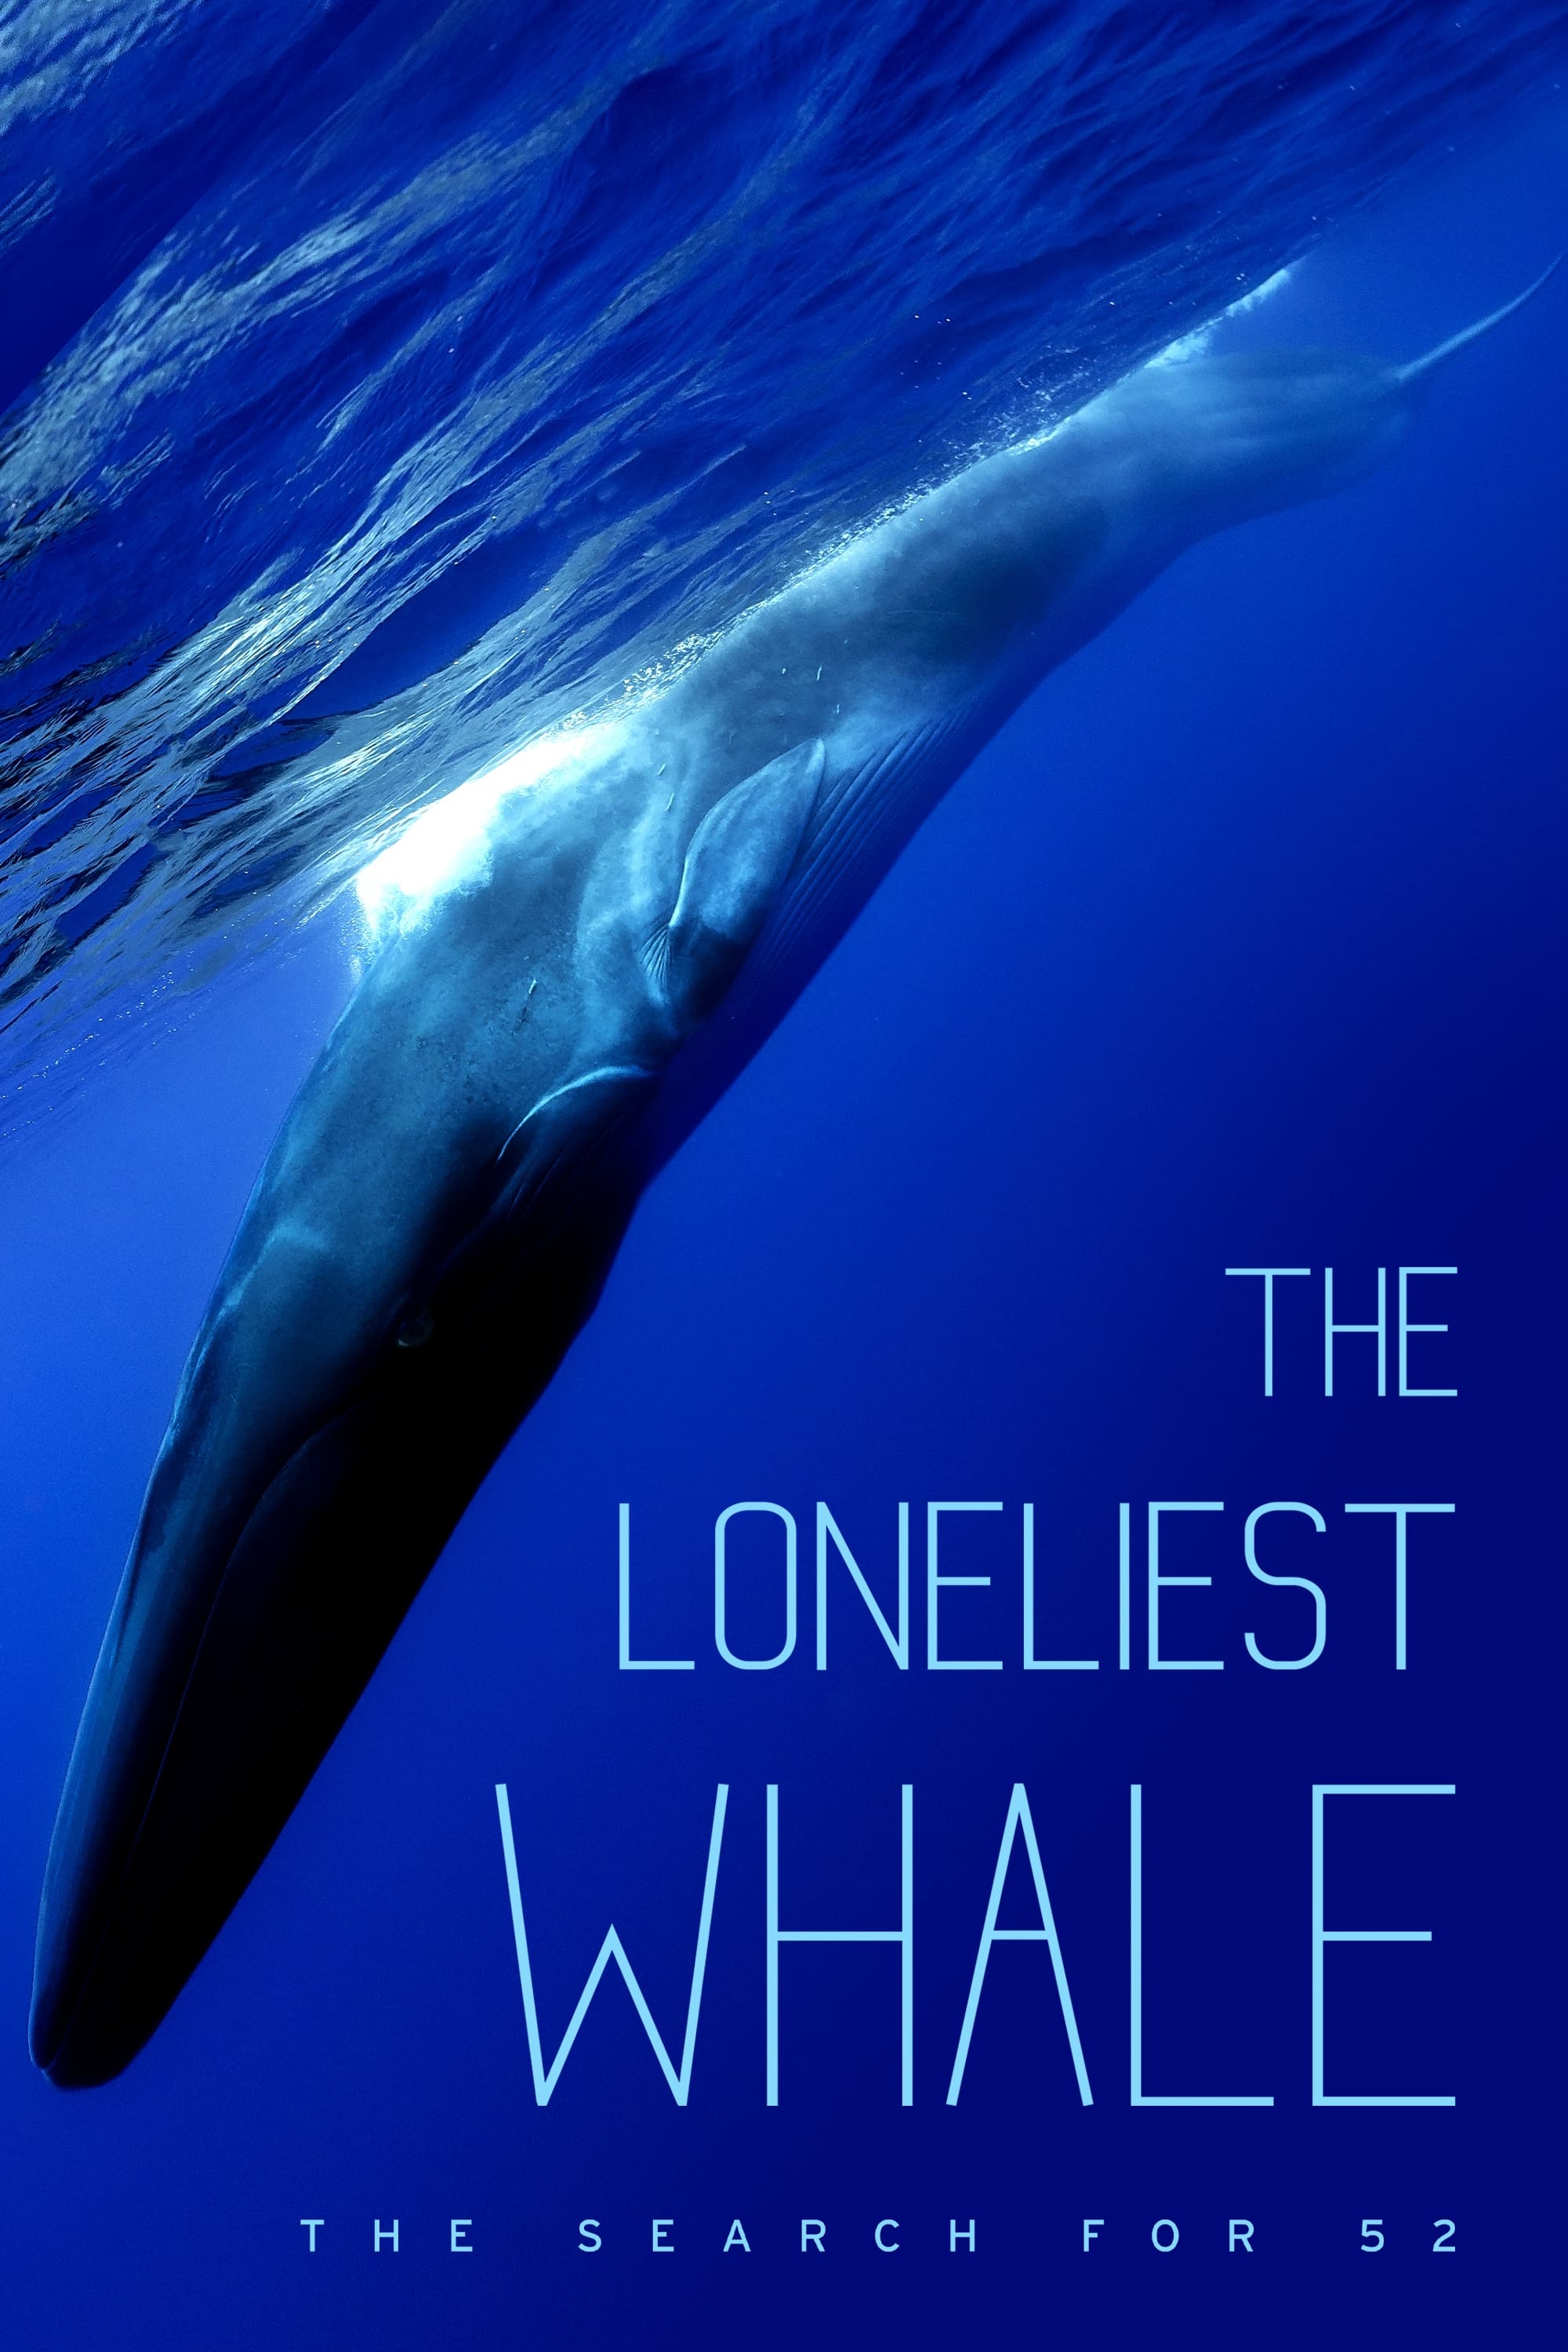 The Loneliest Whale The Search For 52